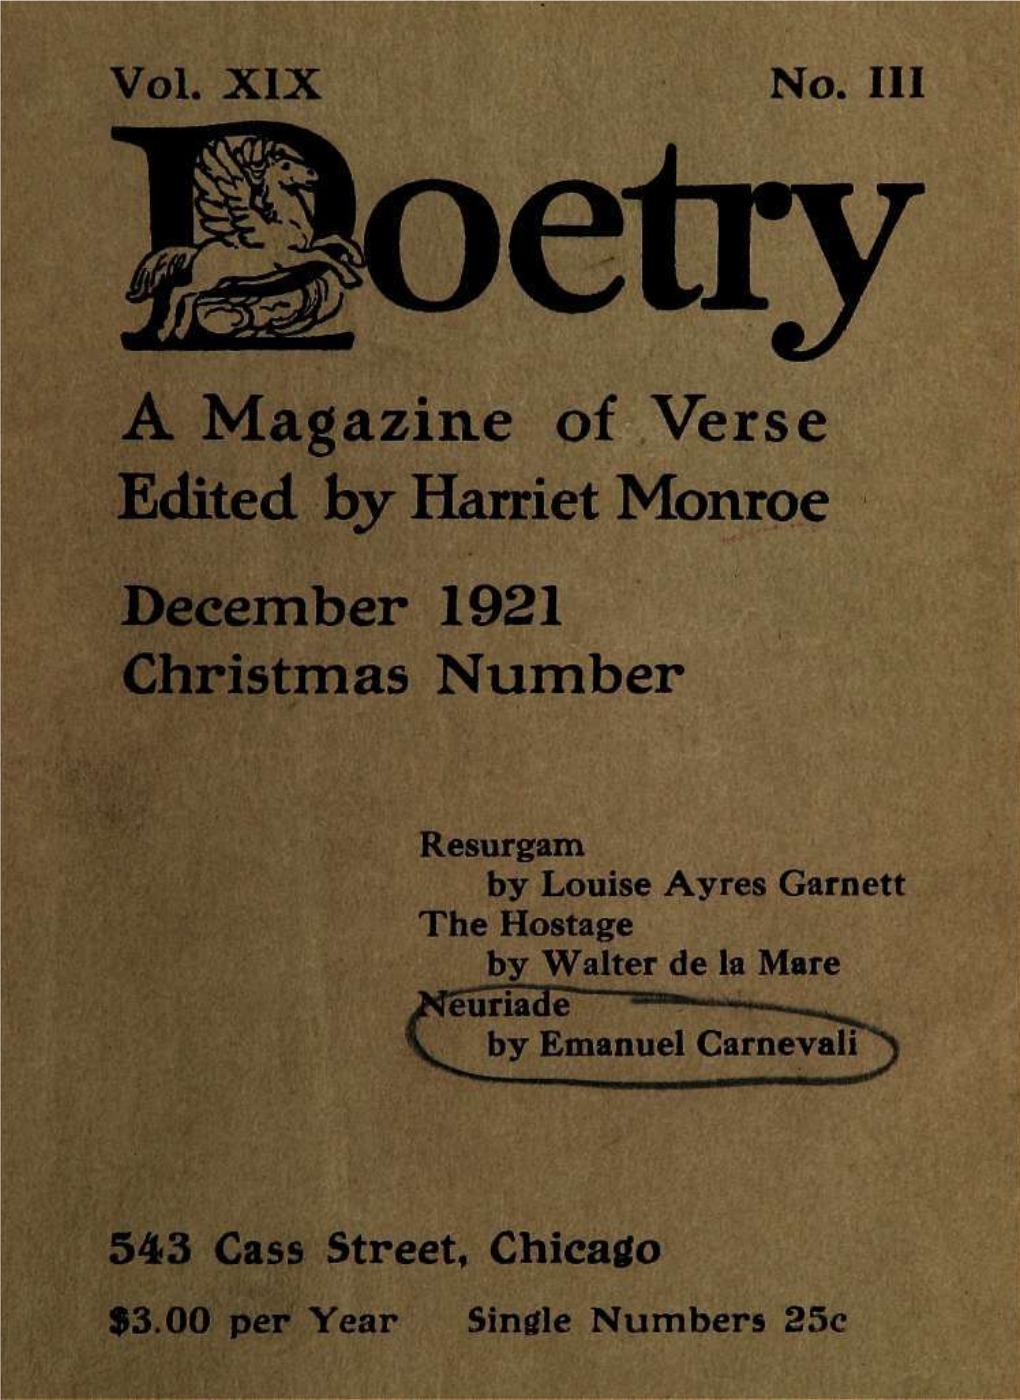 A Magazine of Verse Edited by Harriet Monroe December 1921 Christmas Number